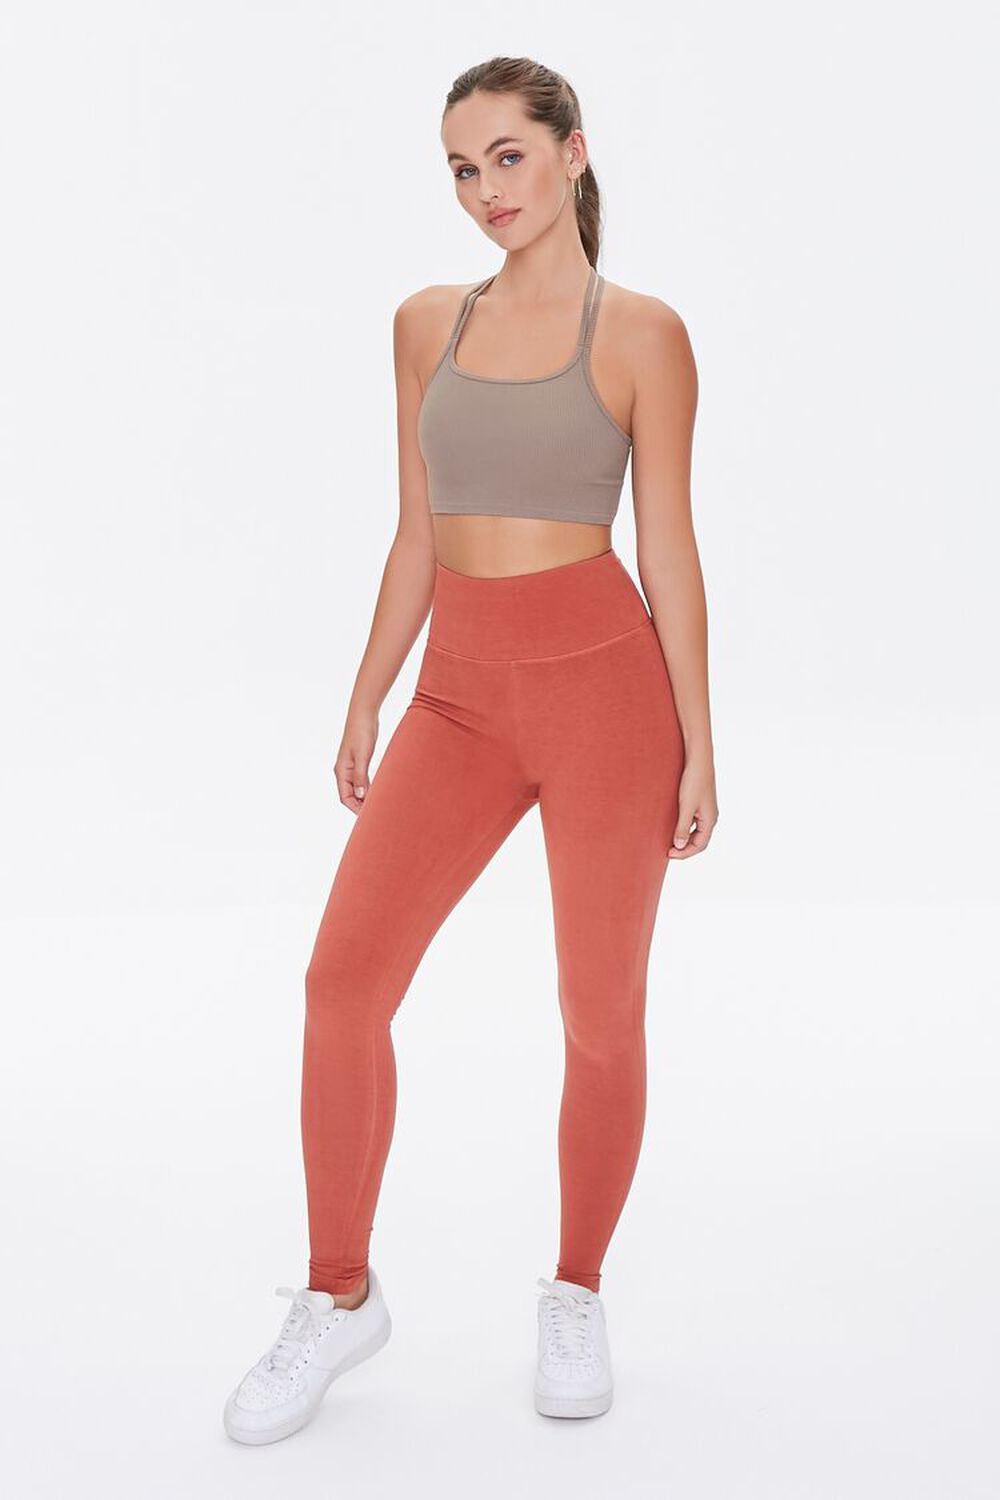 RUST Active Mineral Wash Leggings, image 1